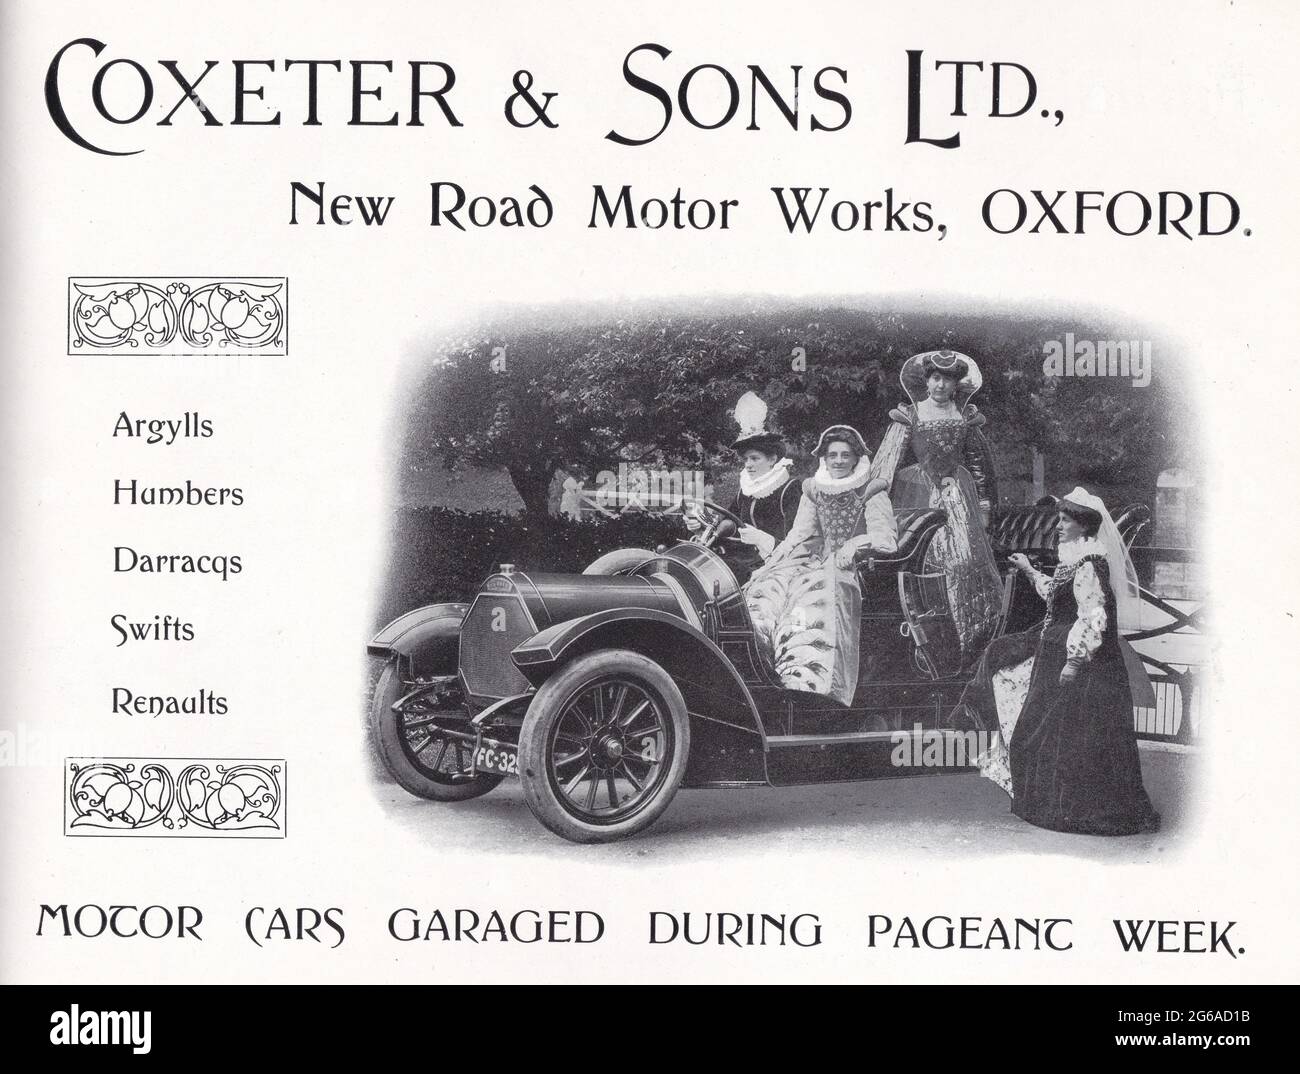 Vintage Coxeter & Sons Ltd., New Road Motor Works, Oxford advert Stock Photo